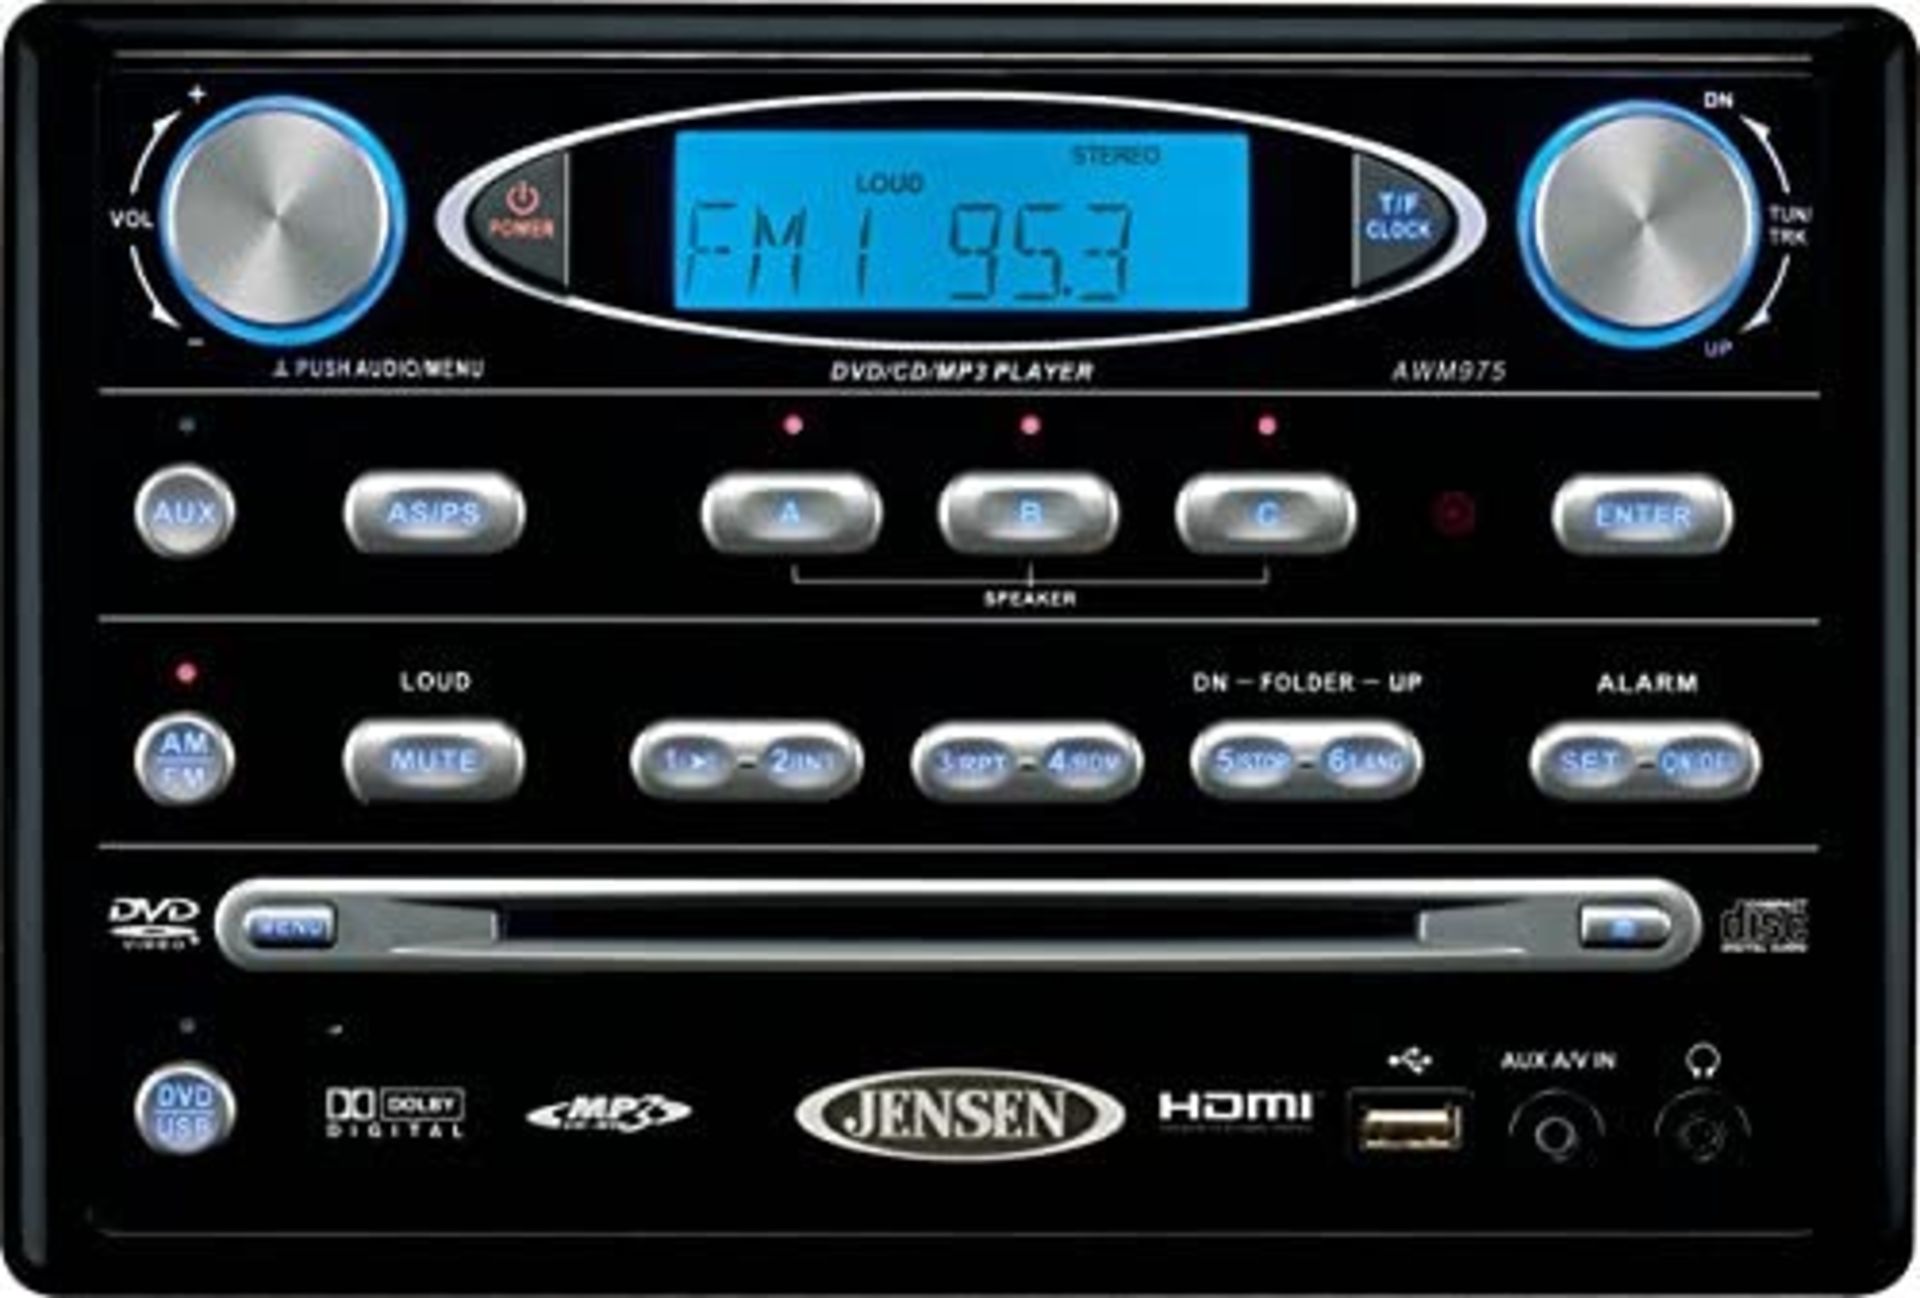 1 x Jenson AWM975 Entertainment System With Two MS5006W Speakers - Features DVD Player, CD, MP3,